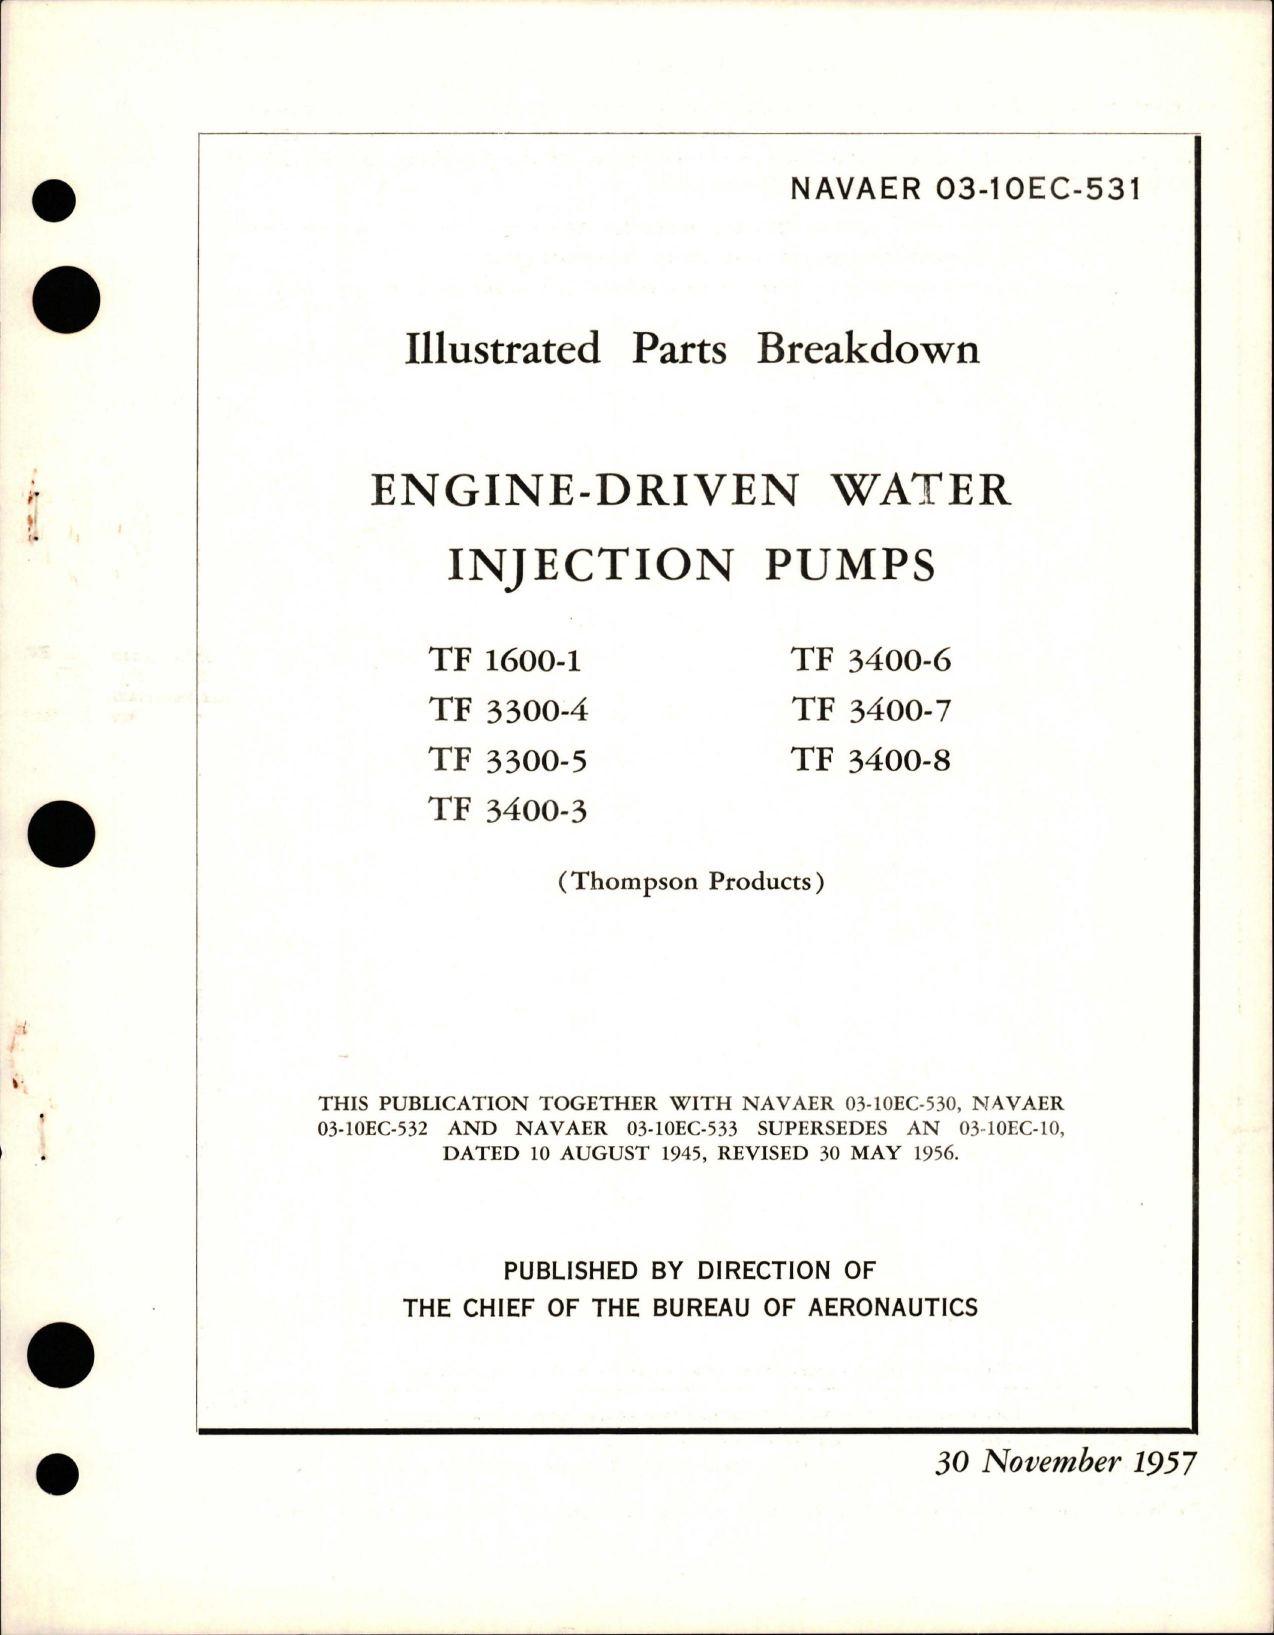 Sample page 1 from AirCorps Library document: Illustrated Parts Breakdown for Engine Driven Injection Pumps